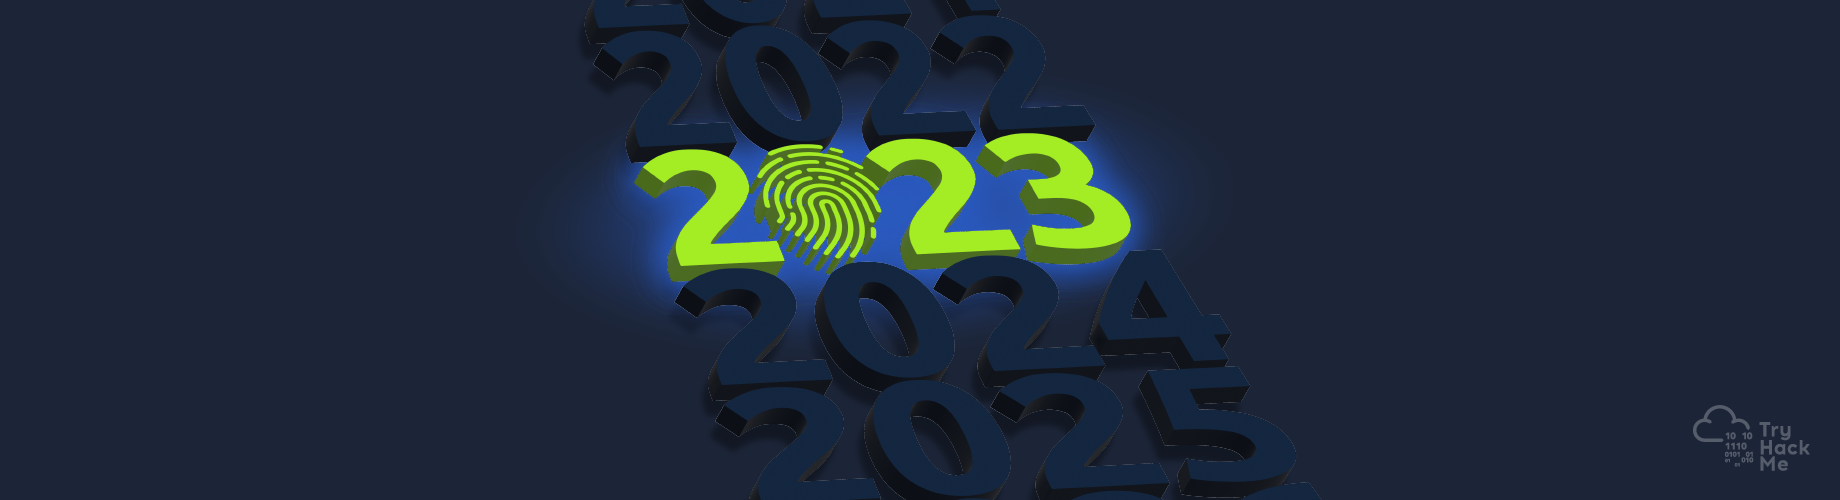 Cyber Security Predictions for 2023